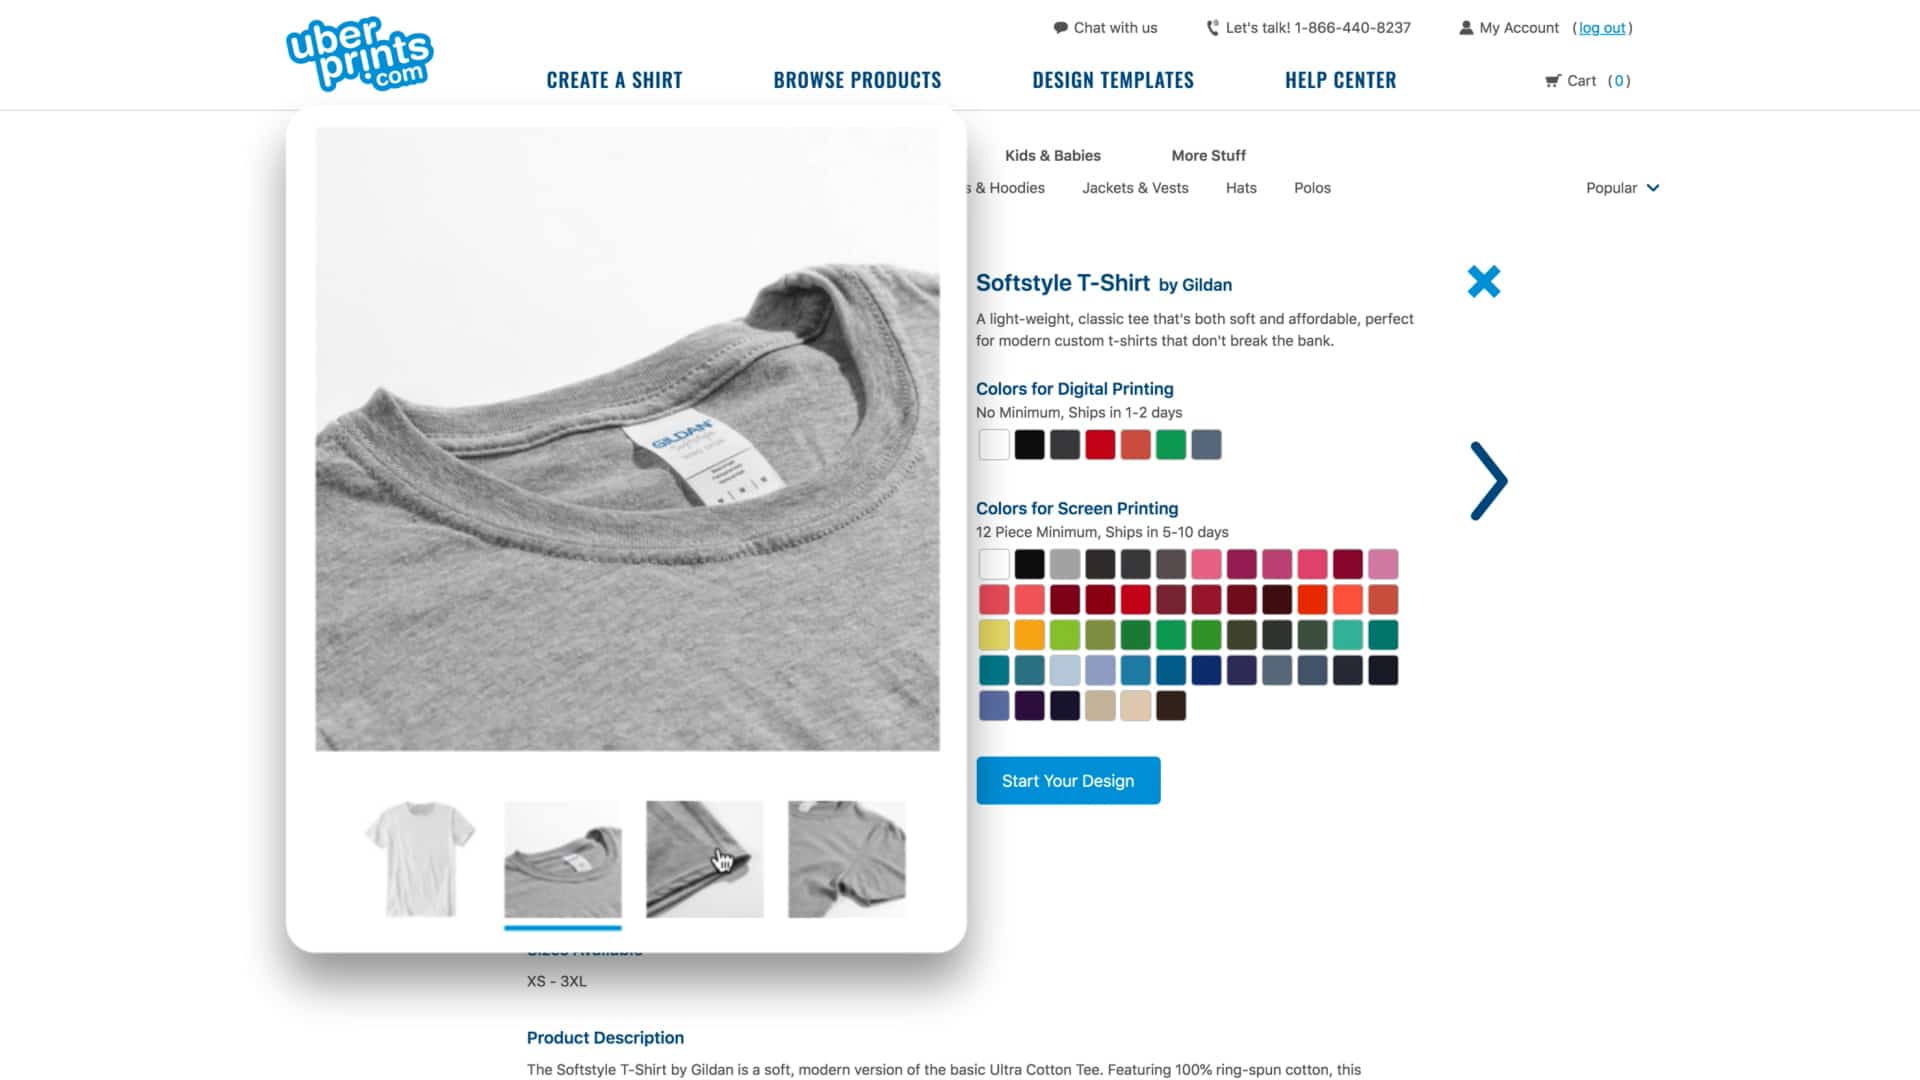 Showing where to find cheap t-shirt options in the UberPrints apparel catalog.